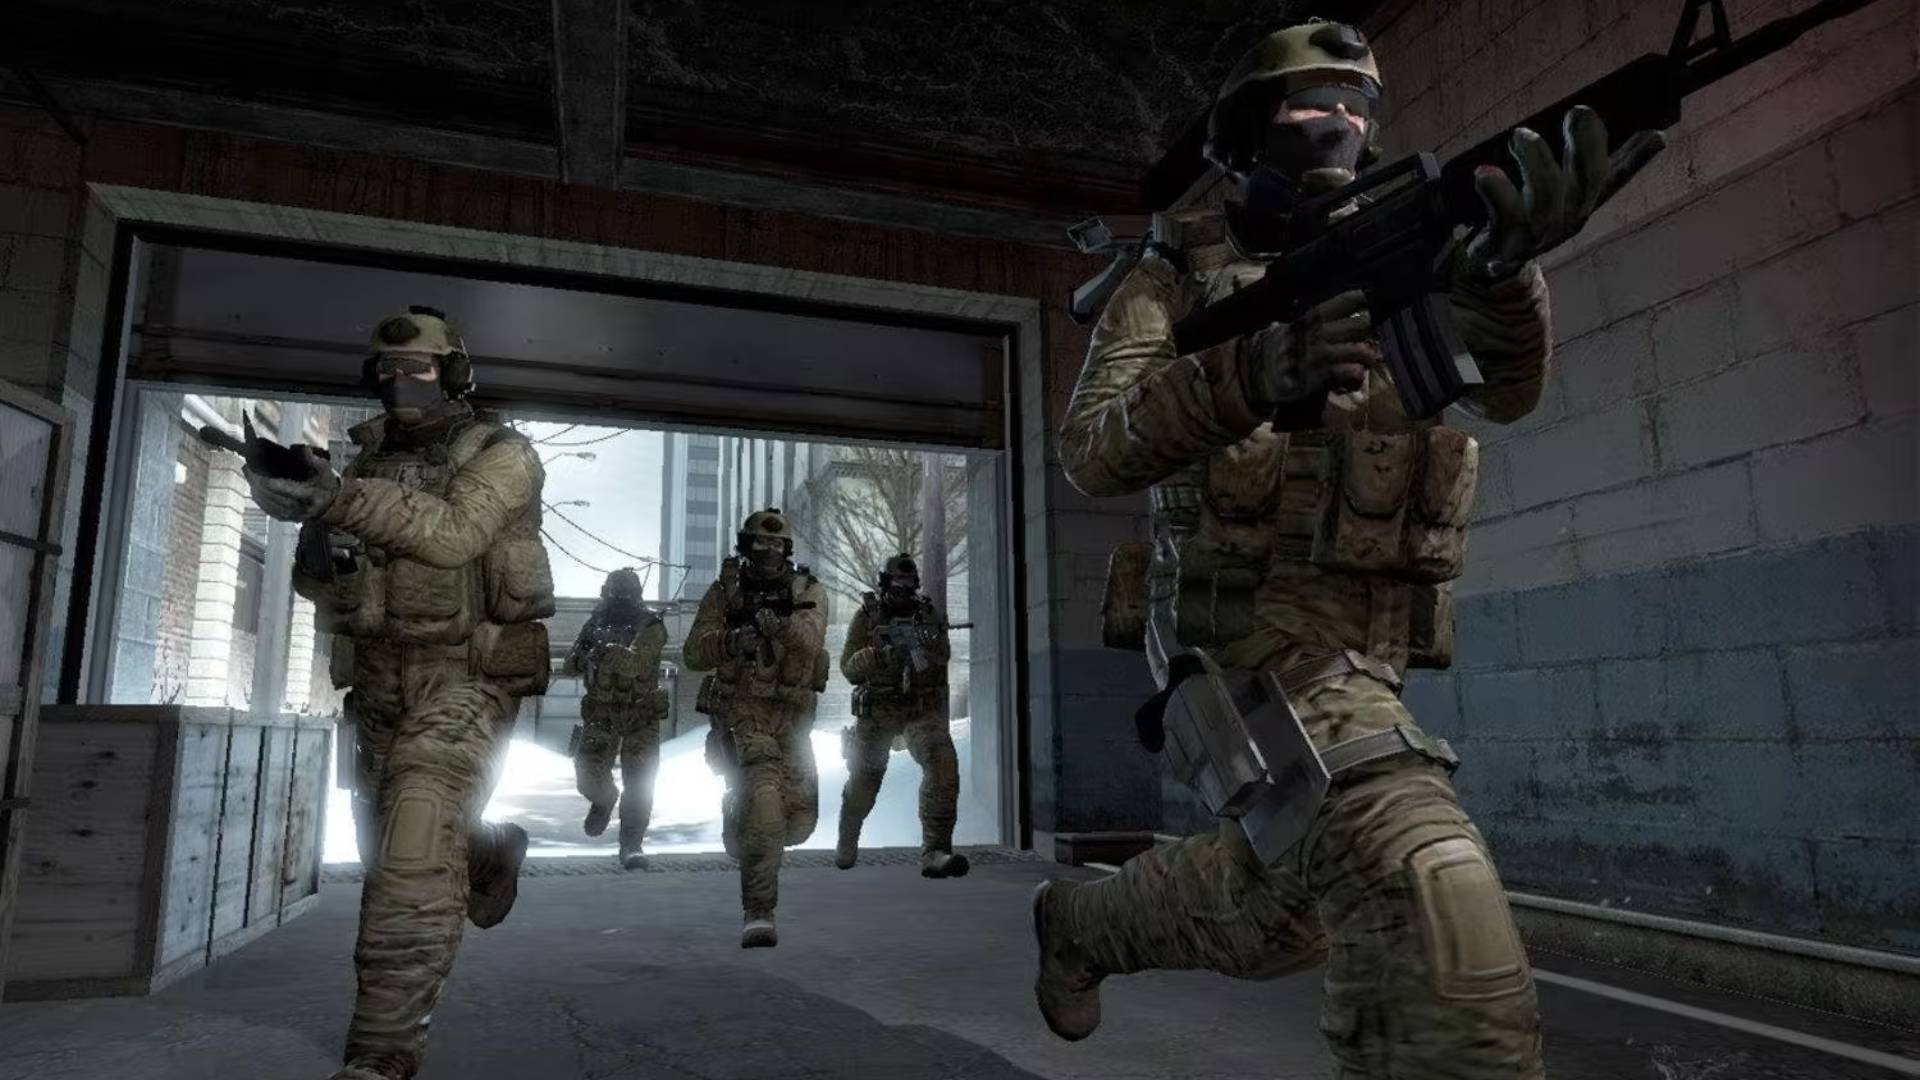 A group of soldiers in full gear enter a warehouse